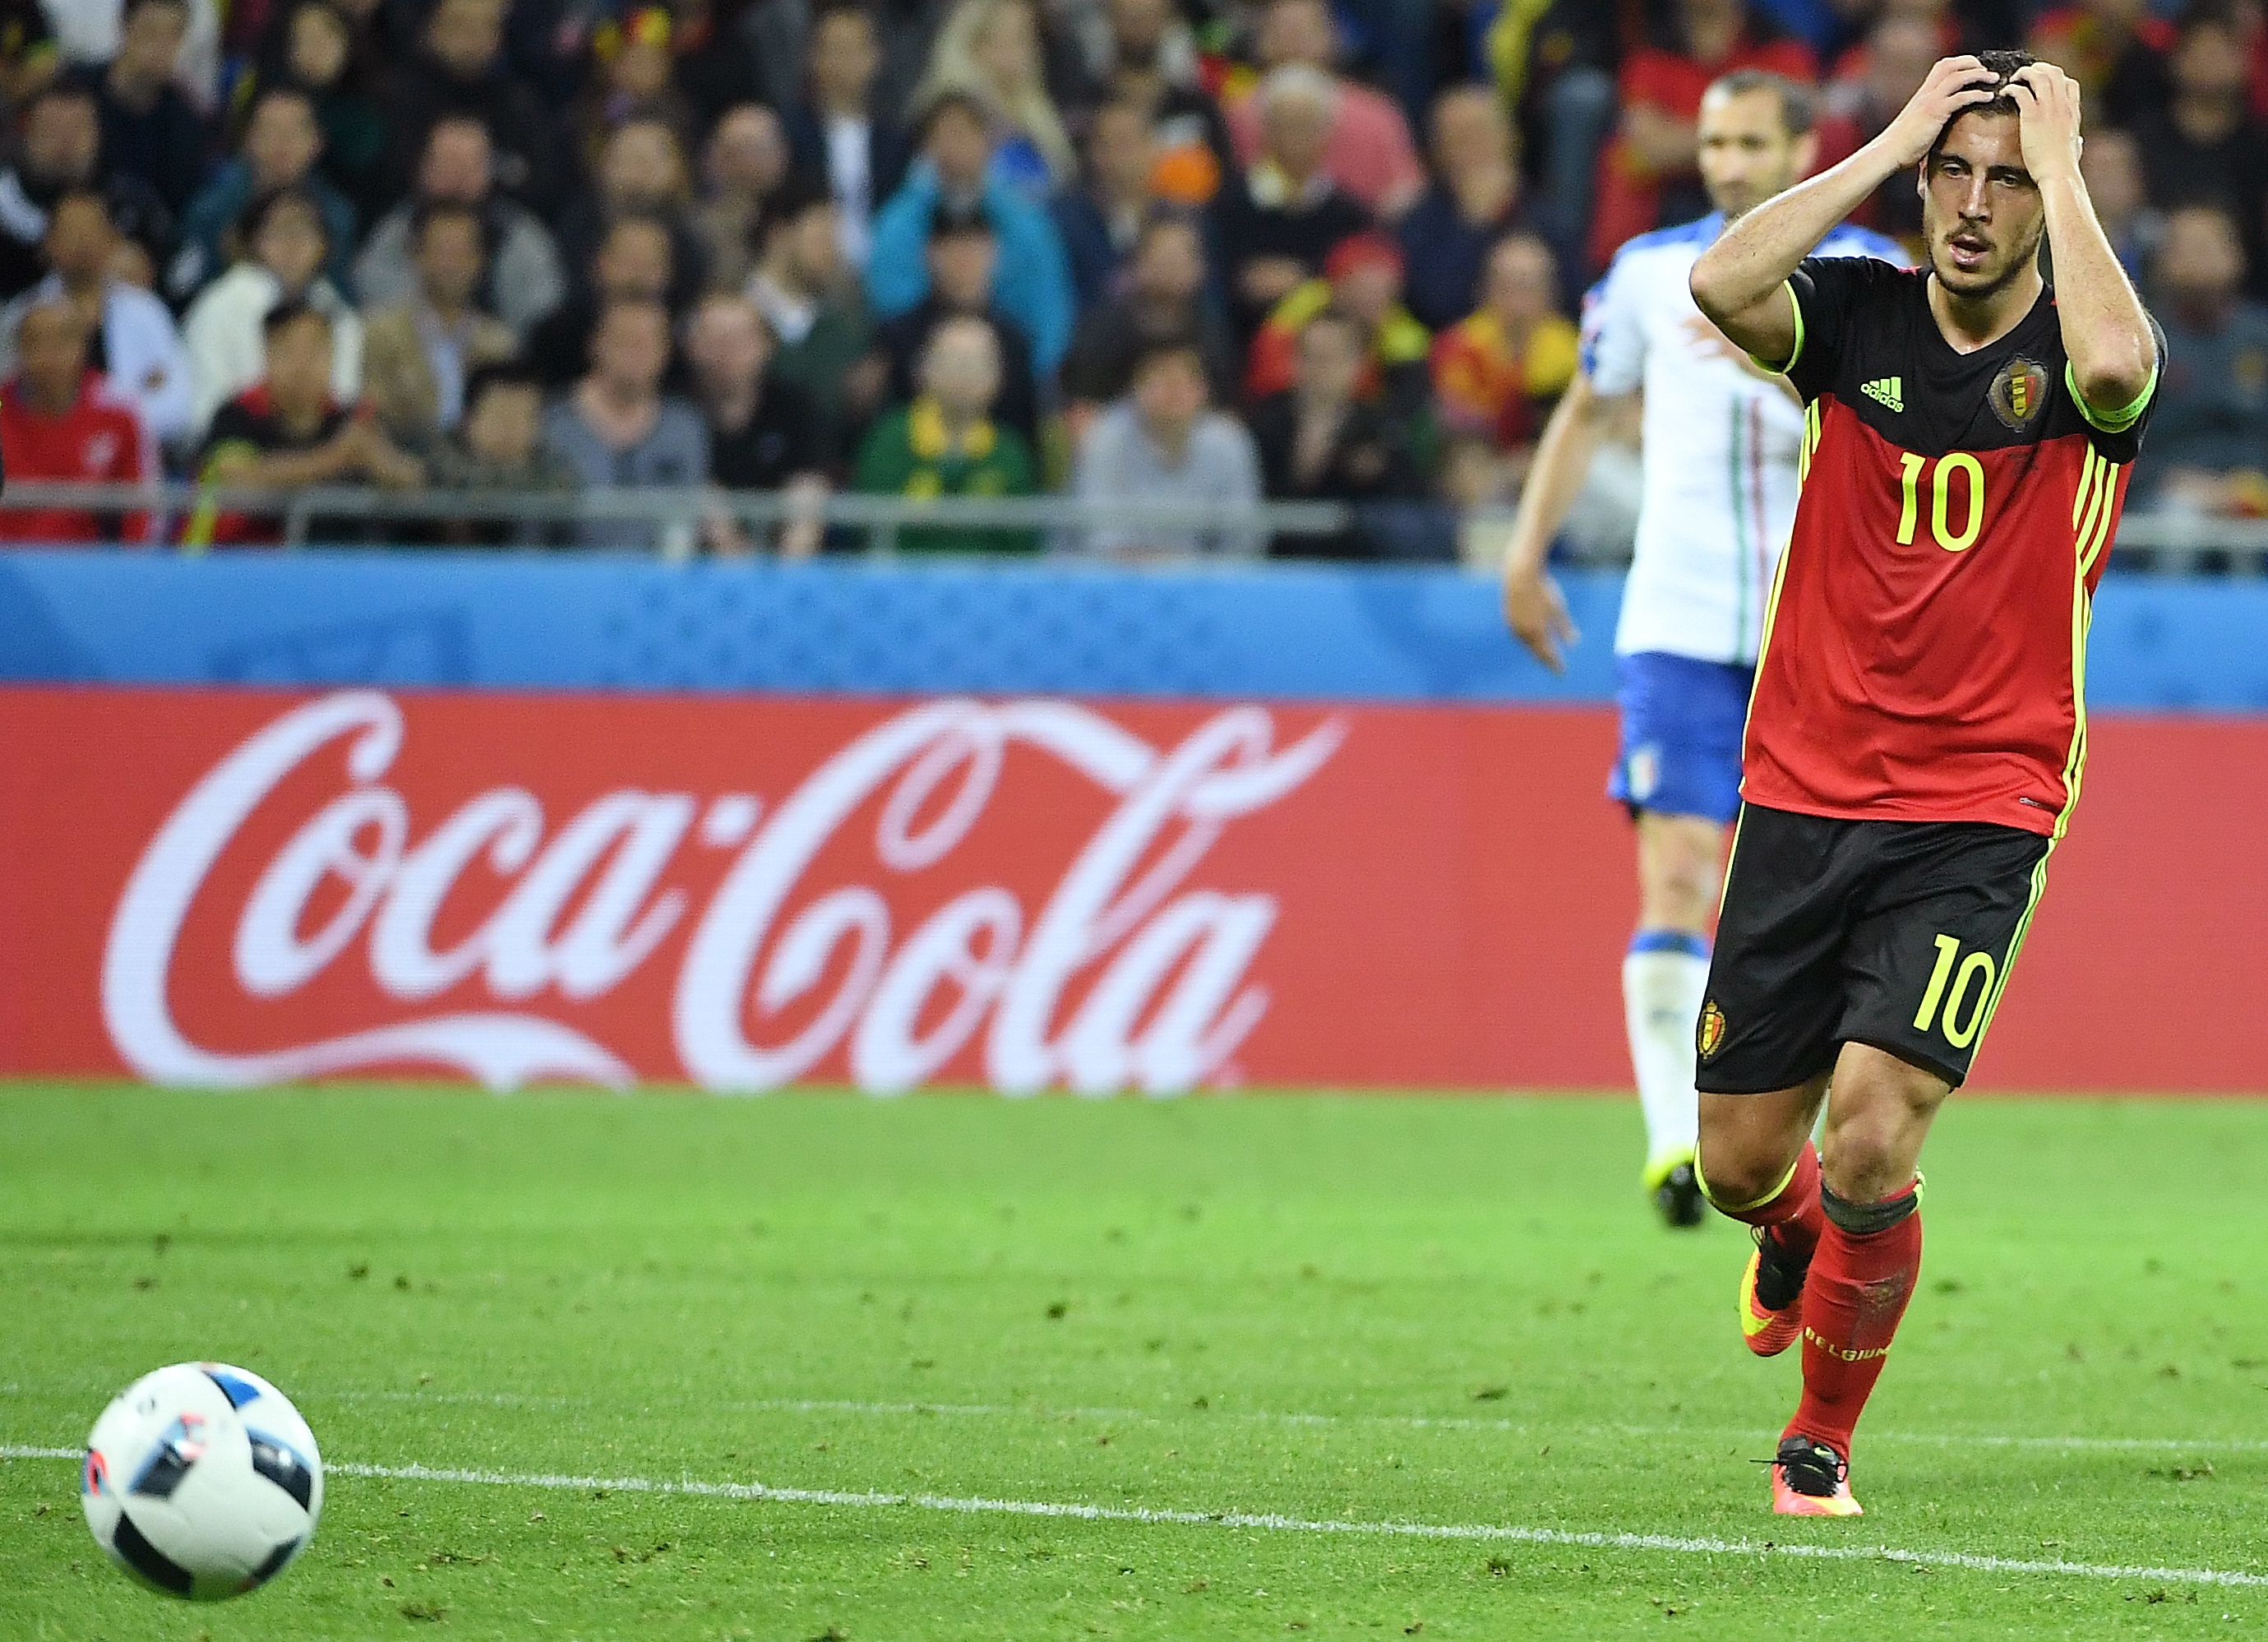 TOPSHOT - Belgium's forward Eden Hazard reacts during the Euro 2016 group E football match between Belgium and Italy at the Parc Olympique Lyonnais stadium in Lyon on June 13, 2016. Italy won 2-0.  / AFP / EMMANUEL DUNAND        (Photo credit should read EMMANUEL DUNAND/AFP/Getty Images)